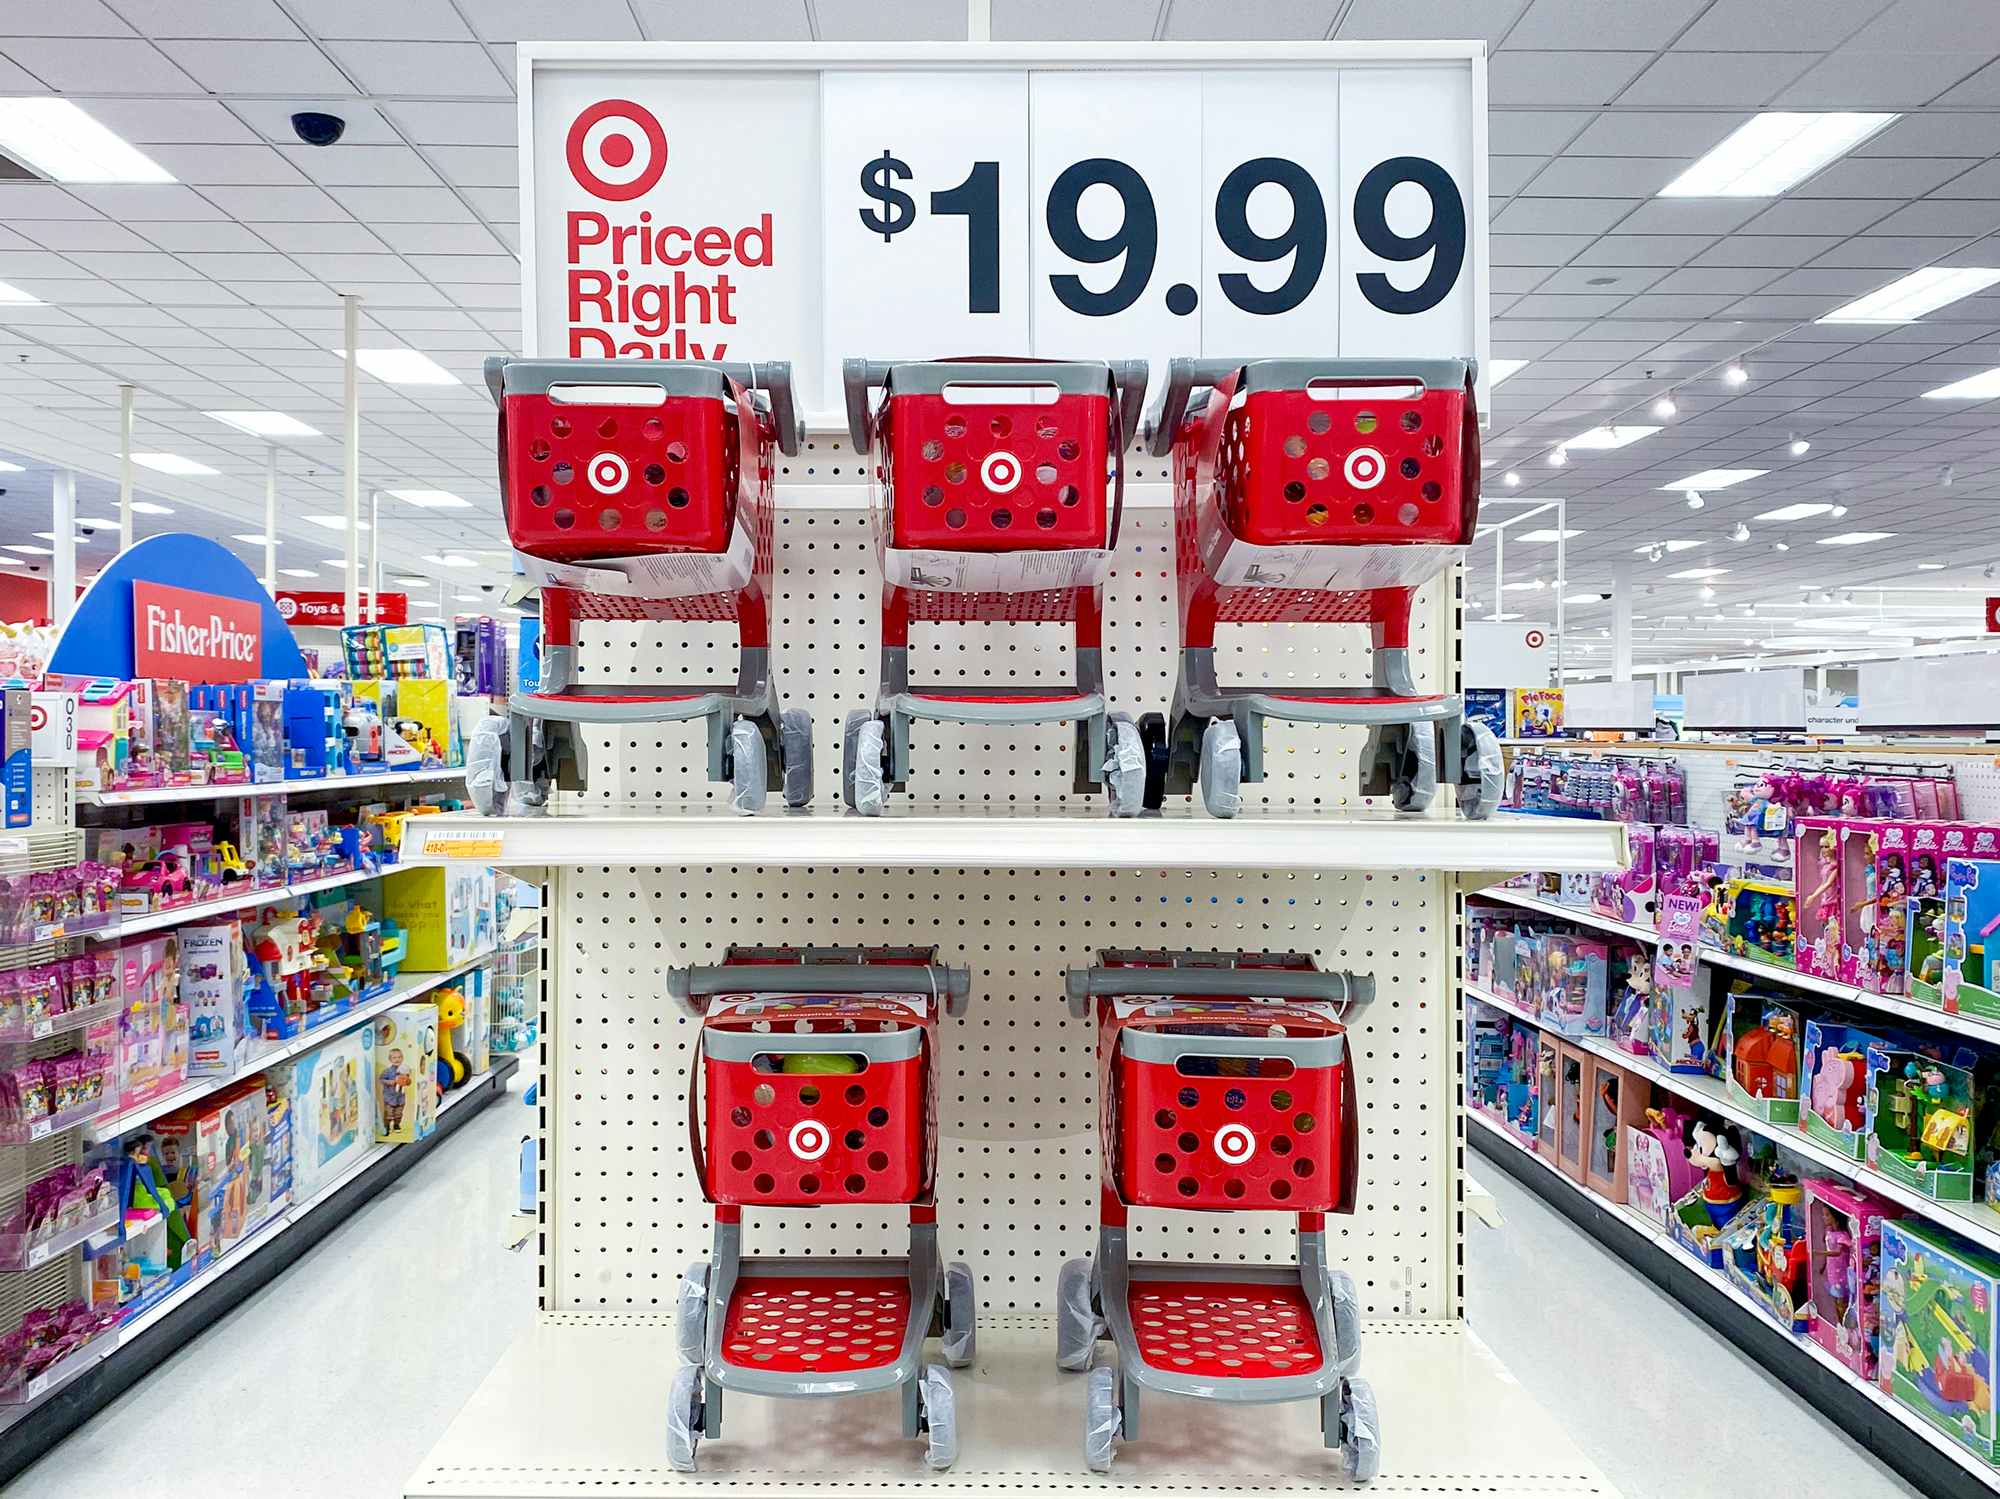 target toy shopping carts on store shelves with $19.99 price sign